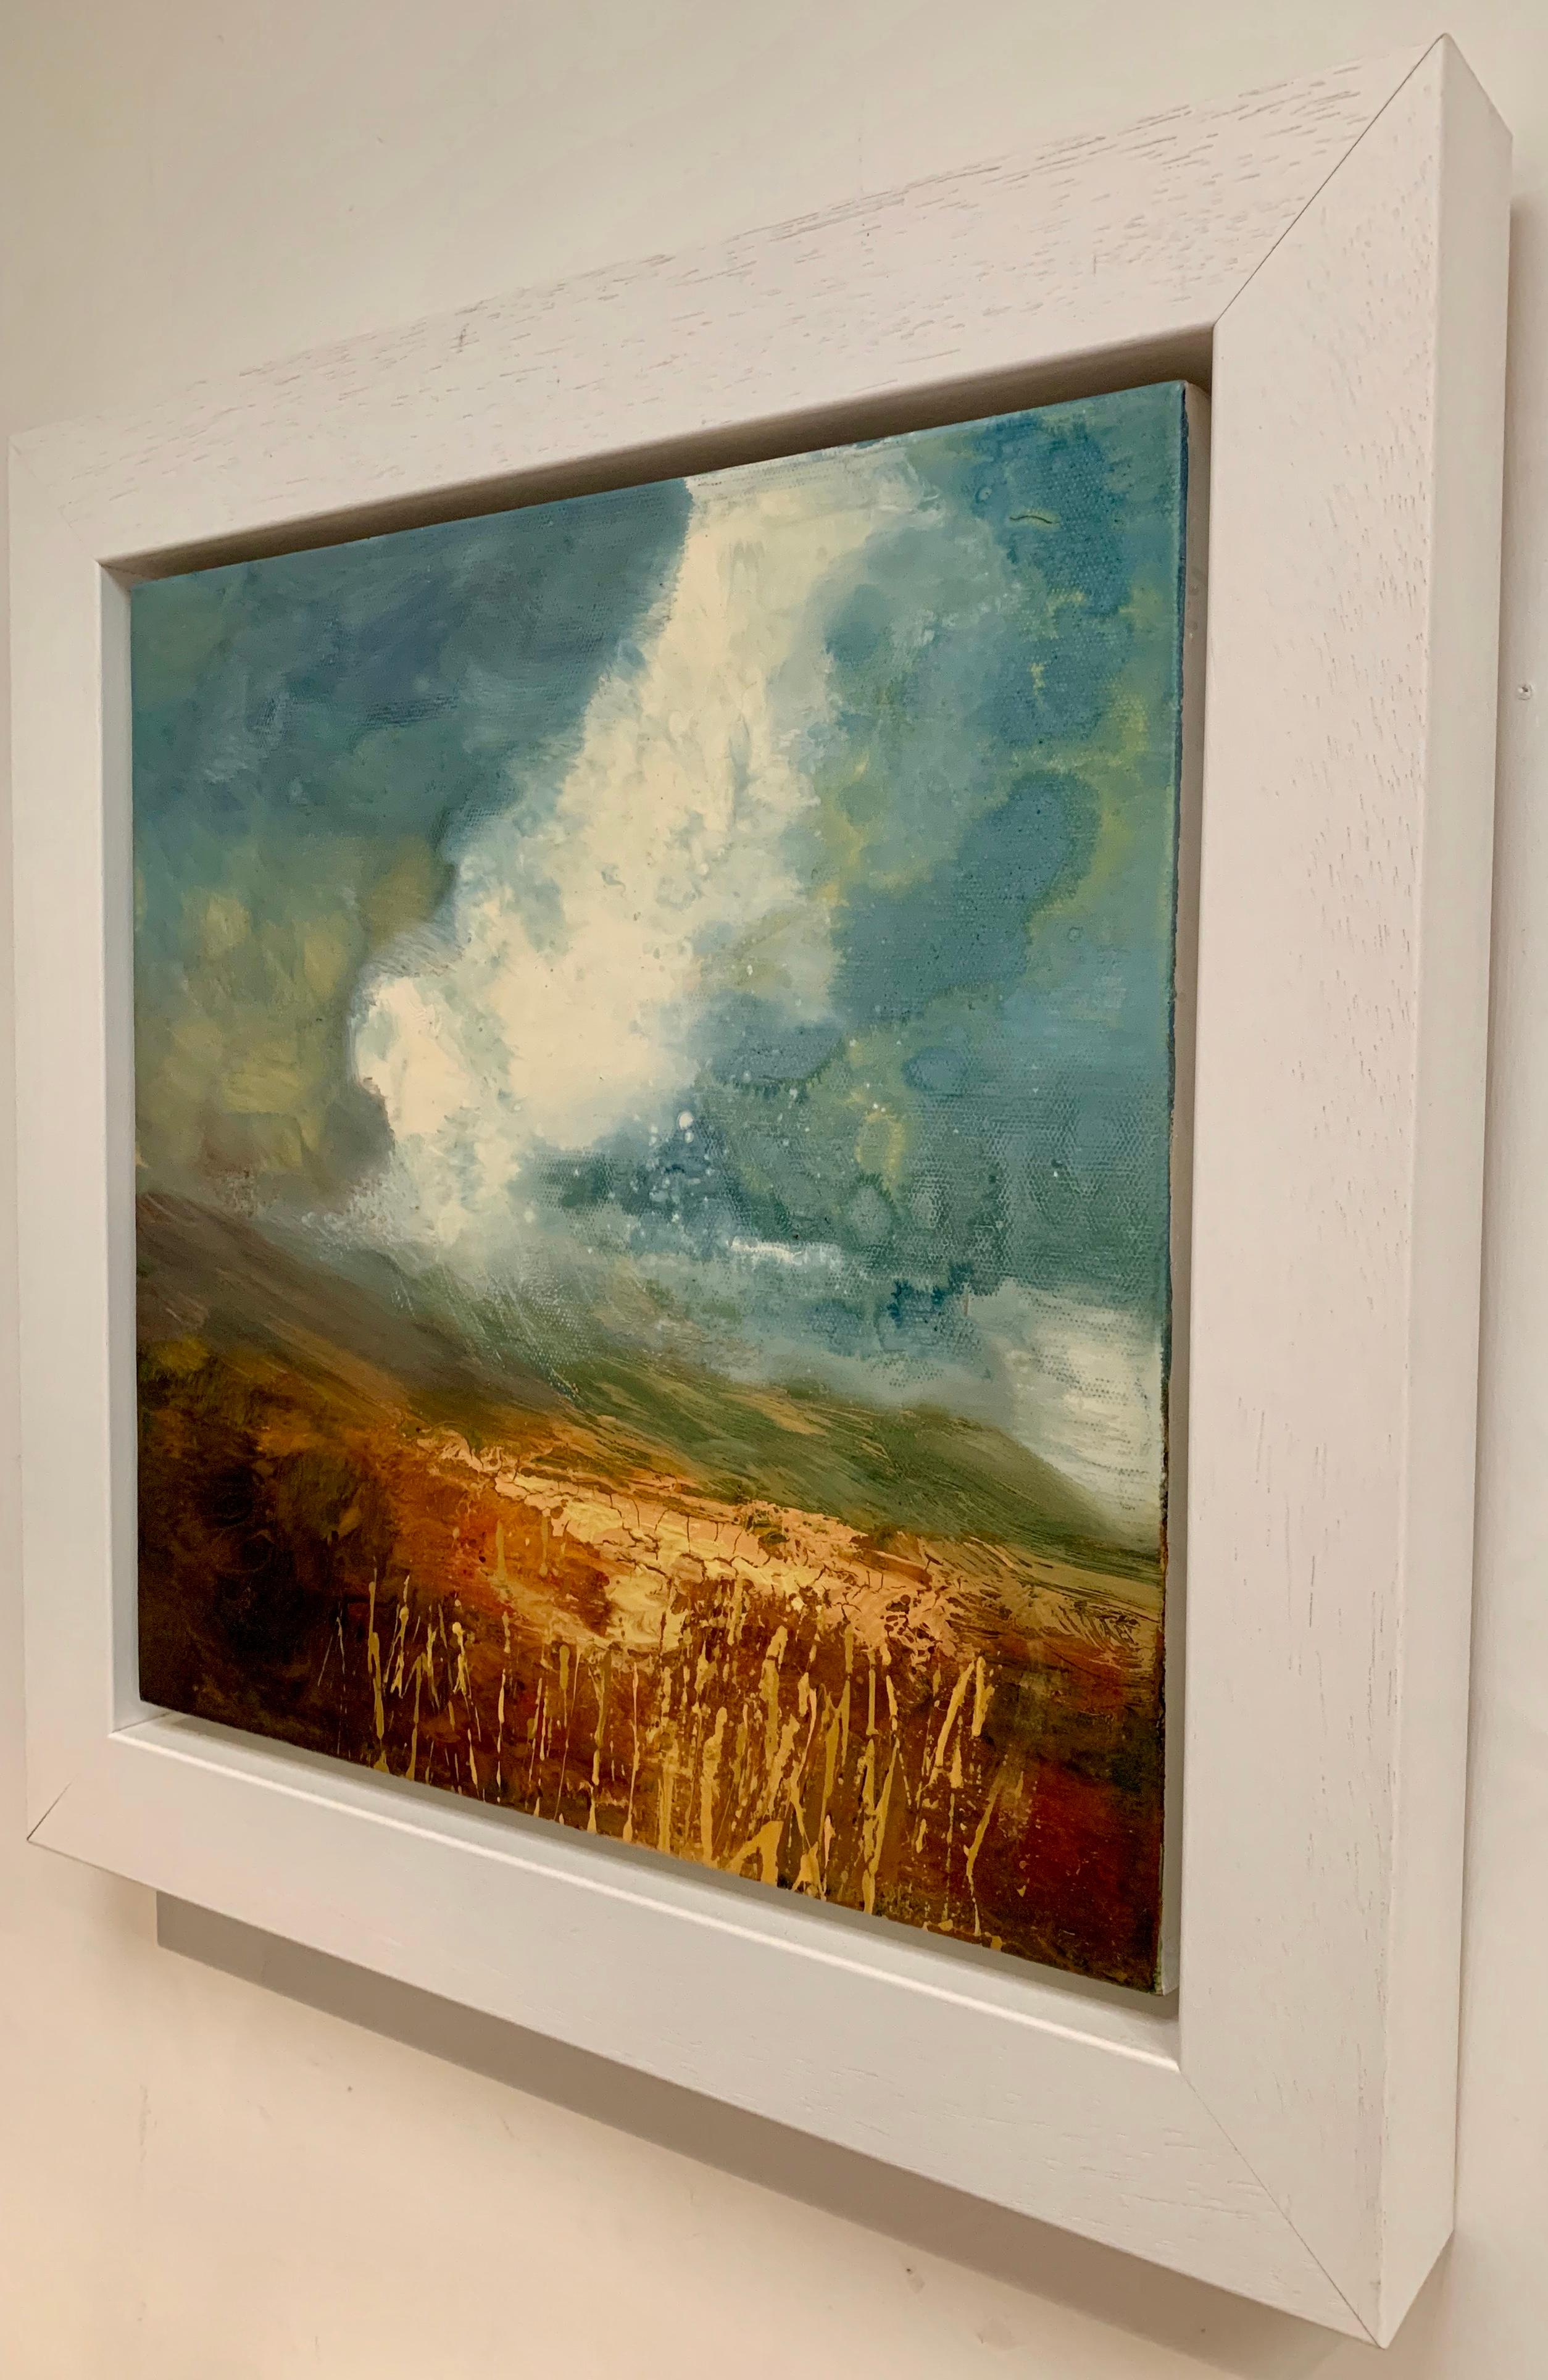 Impasto Oil Painting of English Moorland Storm Cloud by British Landscape Artist Colin Halliday. This painting conveys the intensity of the clouds in Northern England, and the aesthetic beauty of the dramatic weather as it sweeps across the